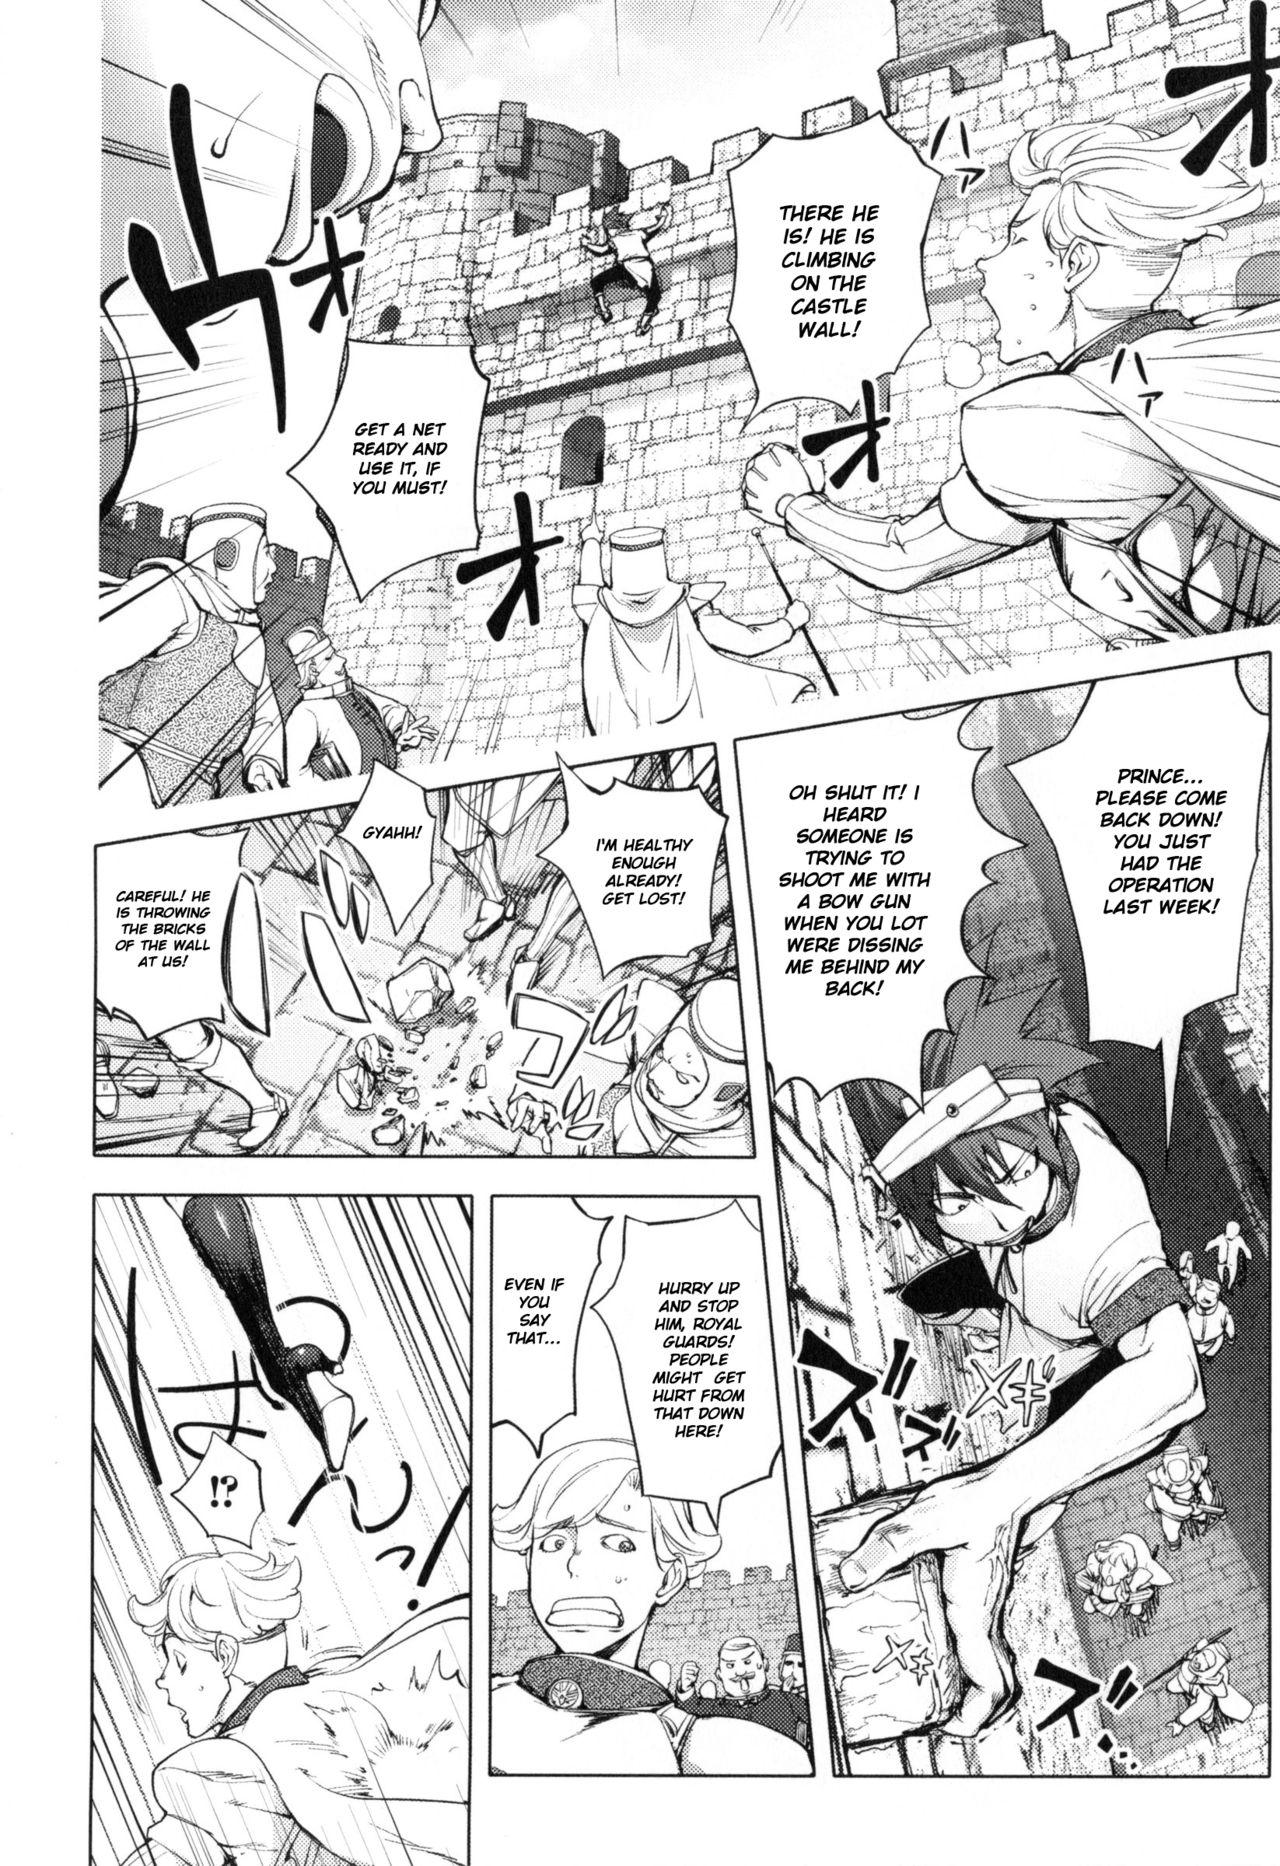 Snake Girls 2 | The Adventures Of The Three Heroes: Chapter 6 - Snake Girl Part 2 0